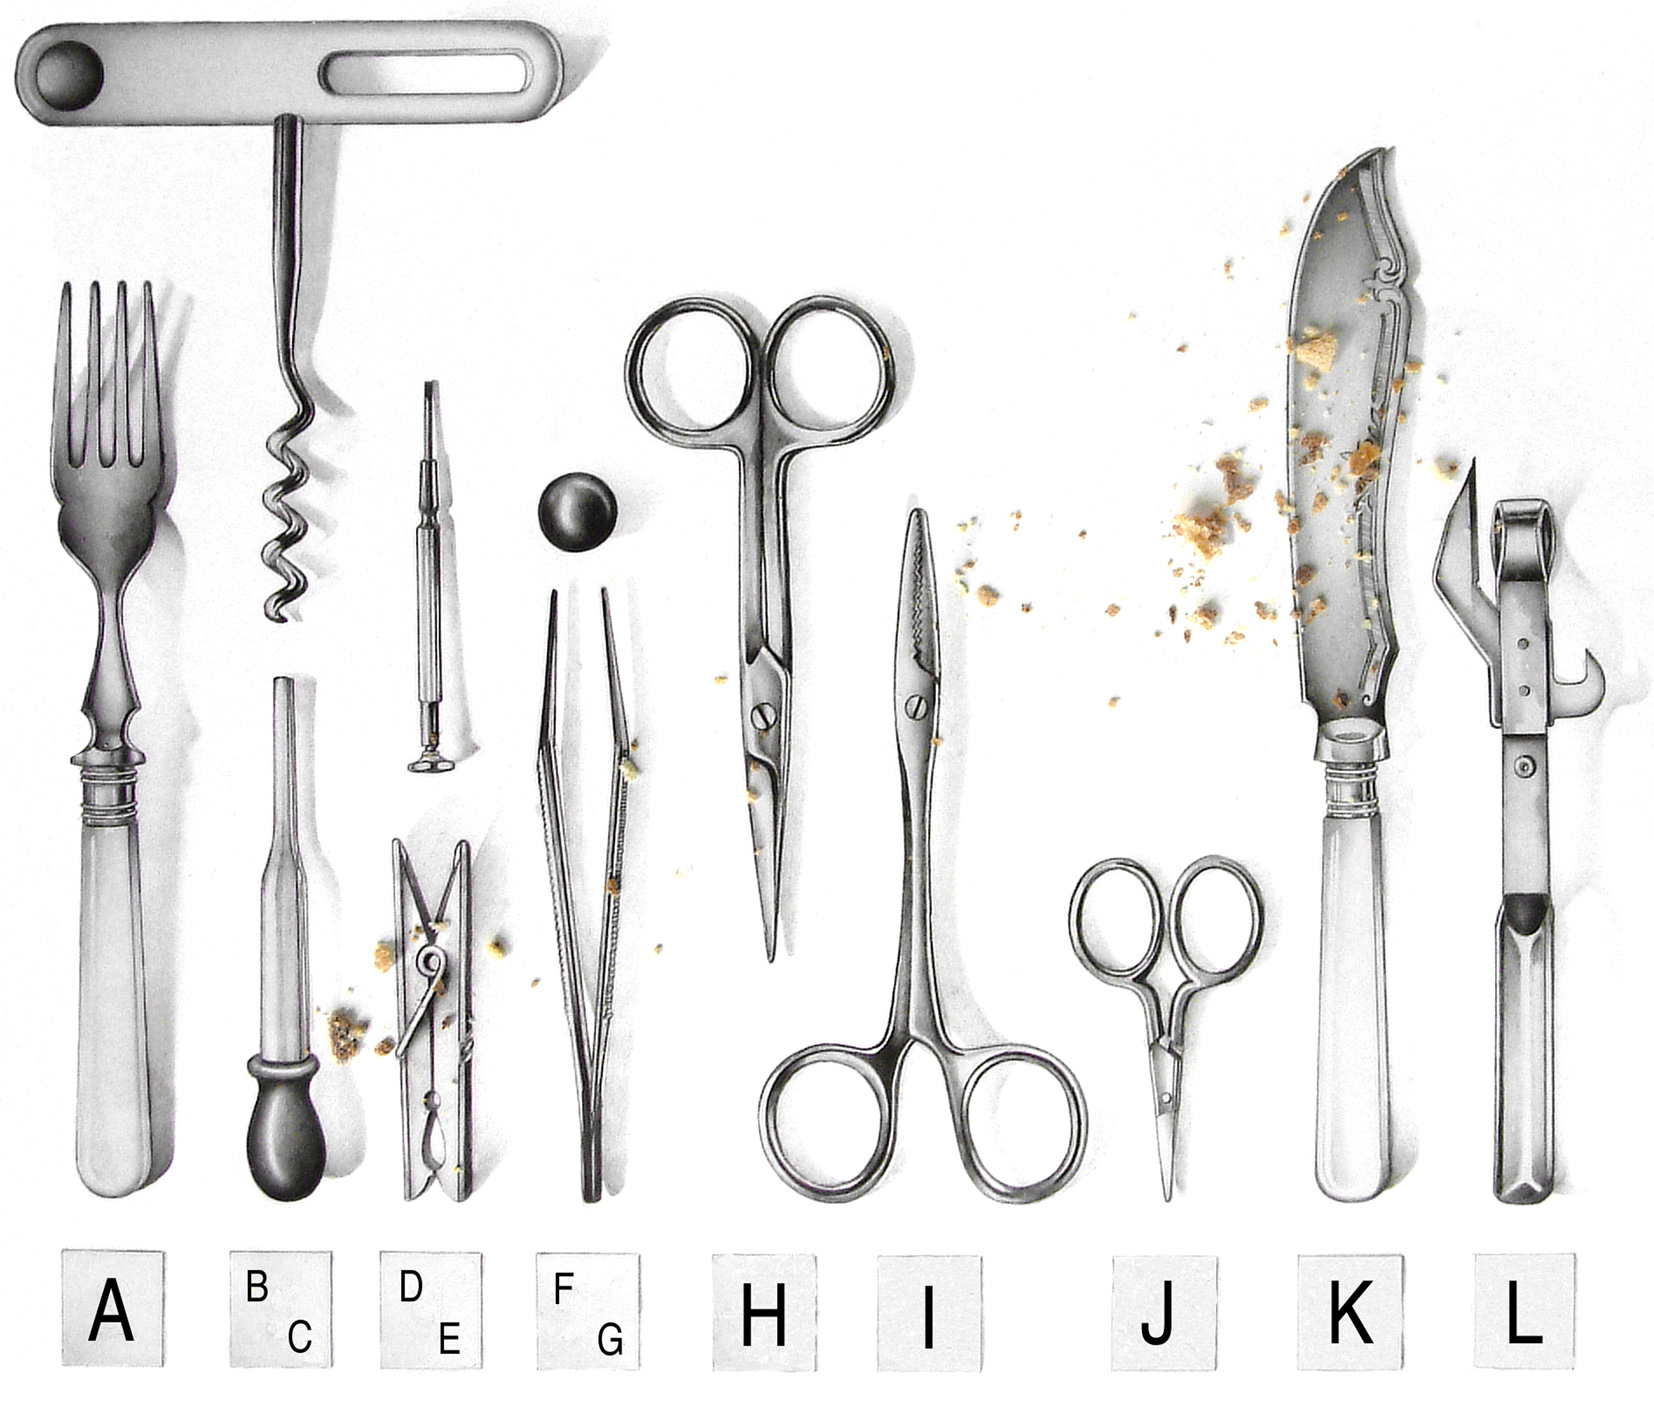 Utensils And Implements